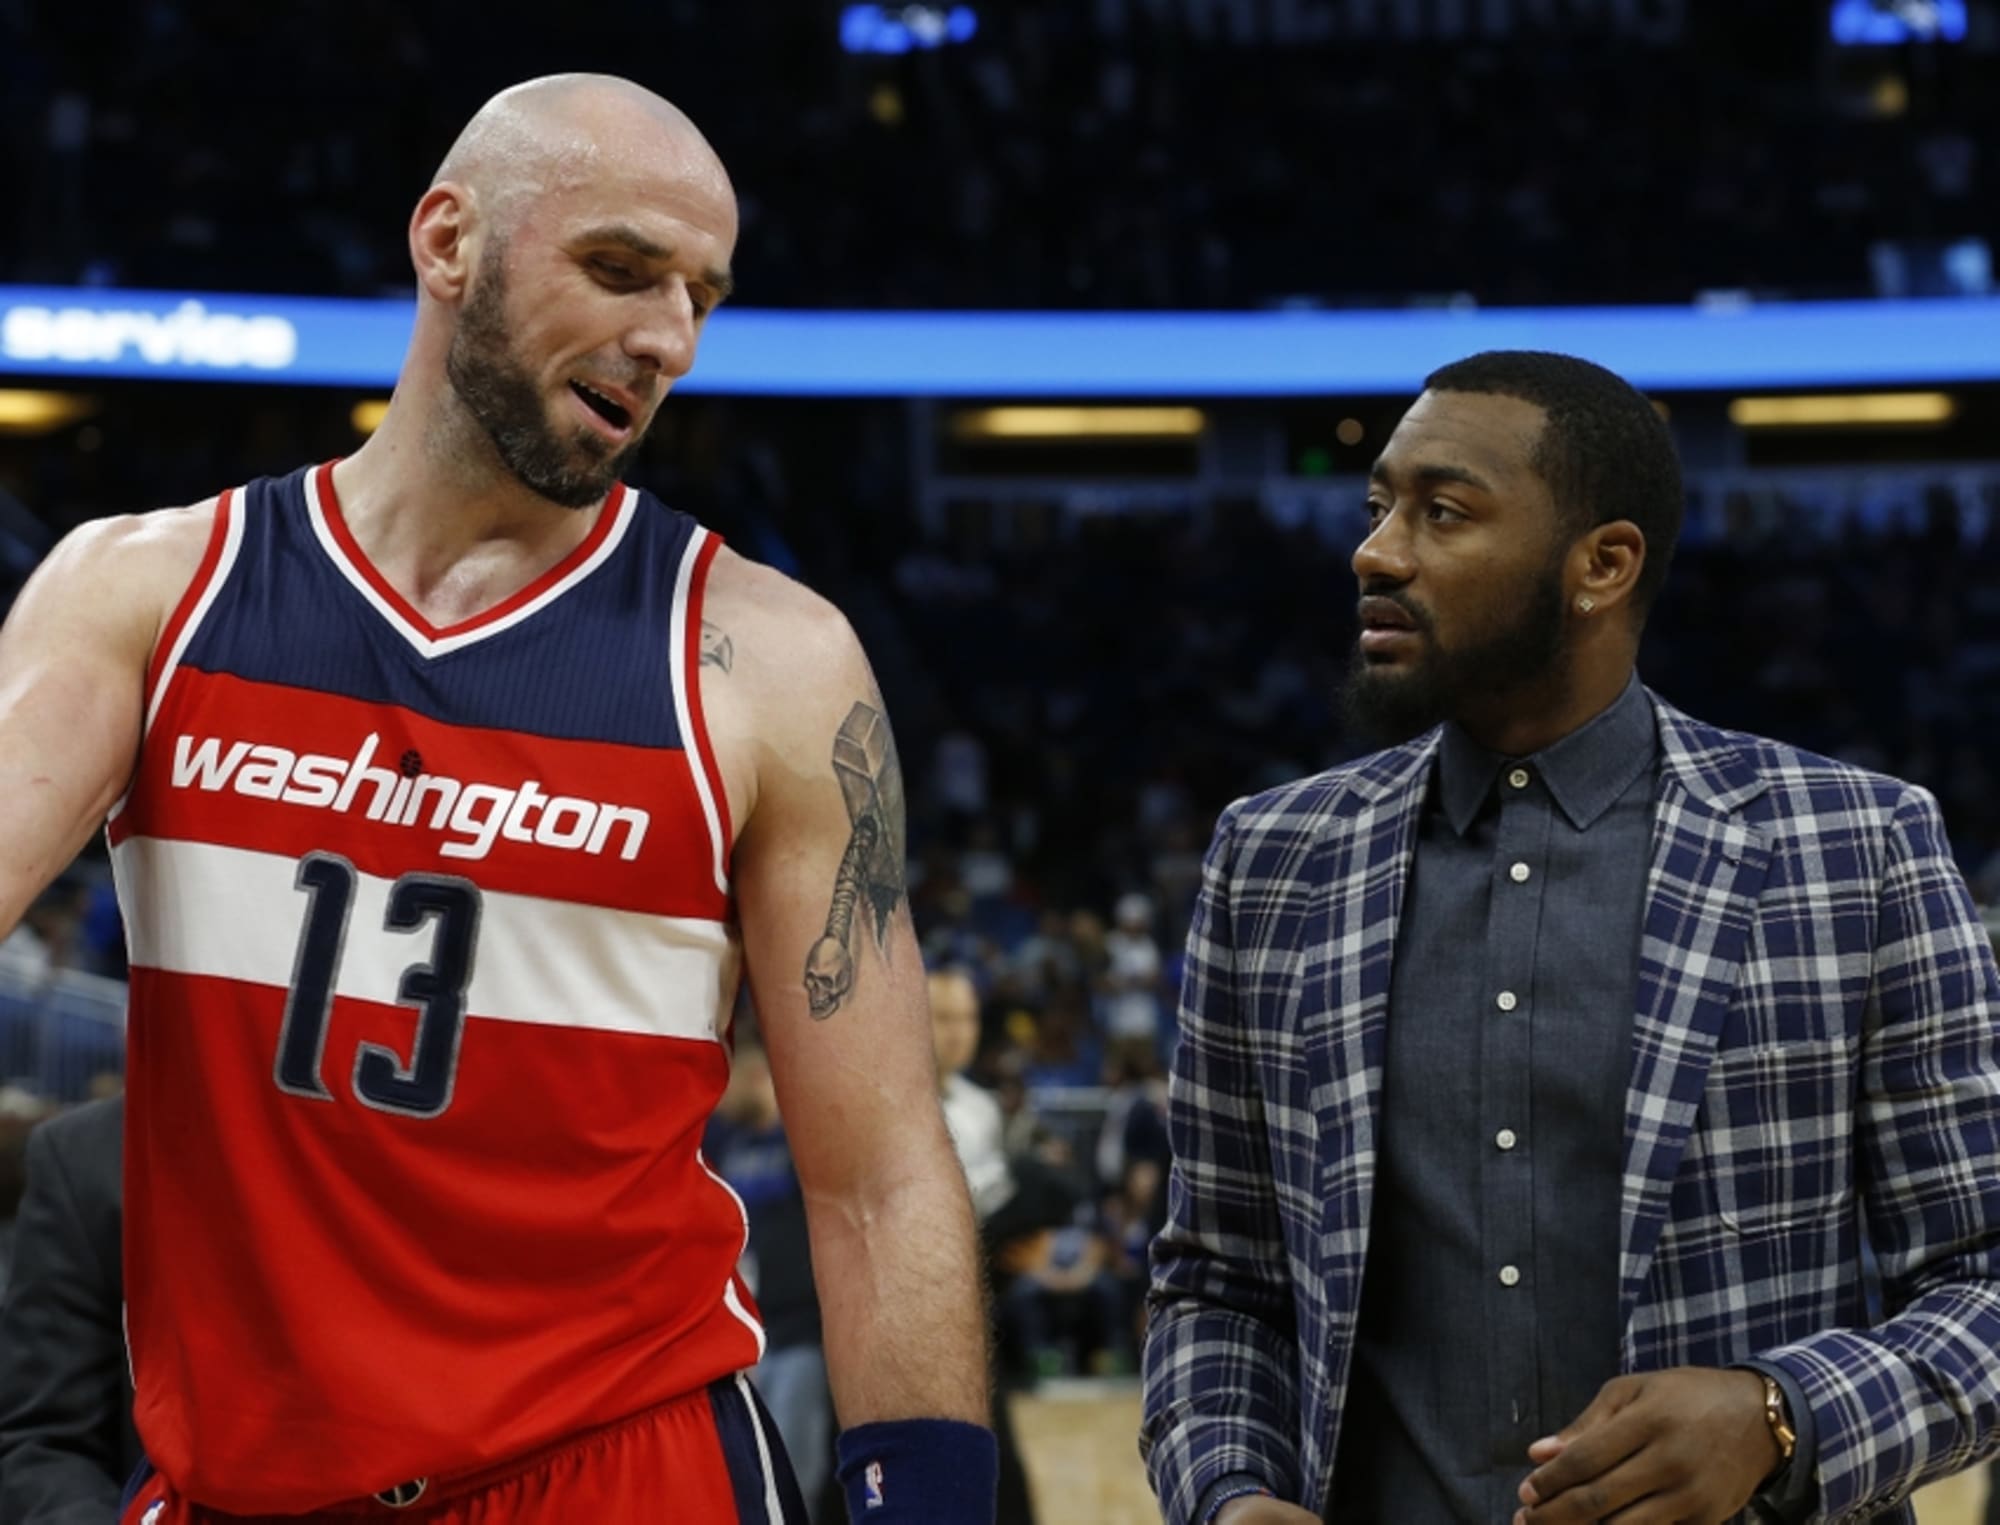 Wizards center Marcin Gortat's physicality is beautifully understated